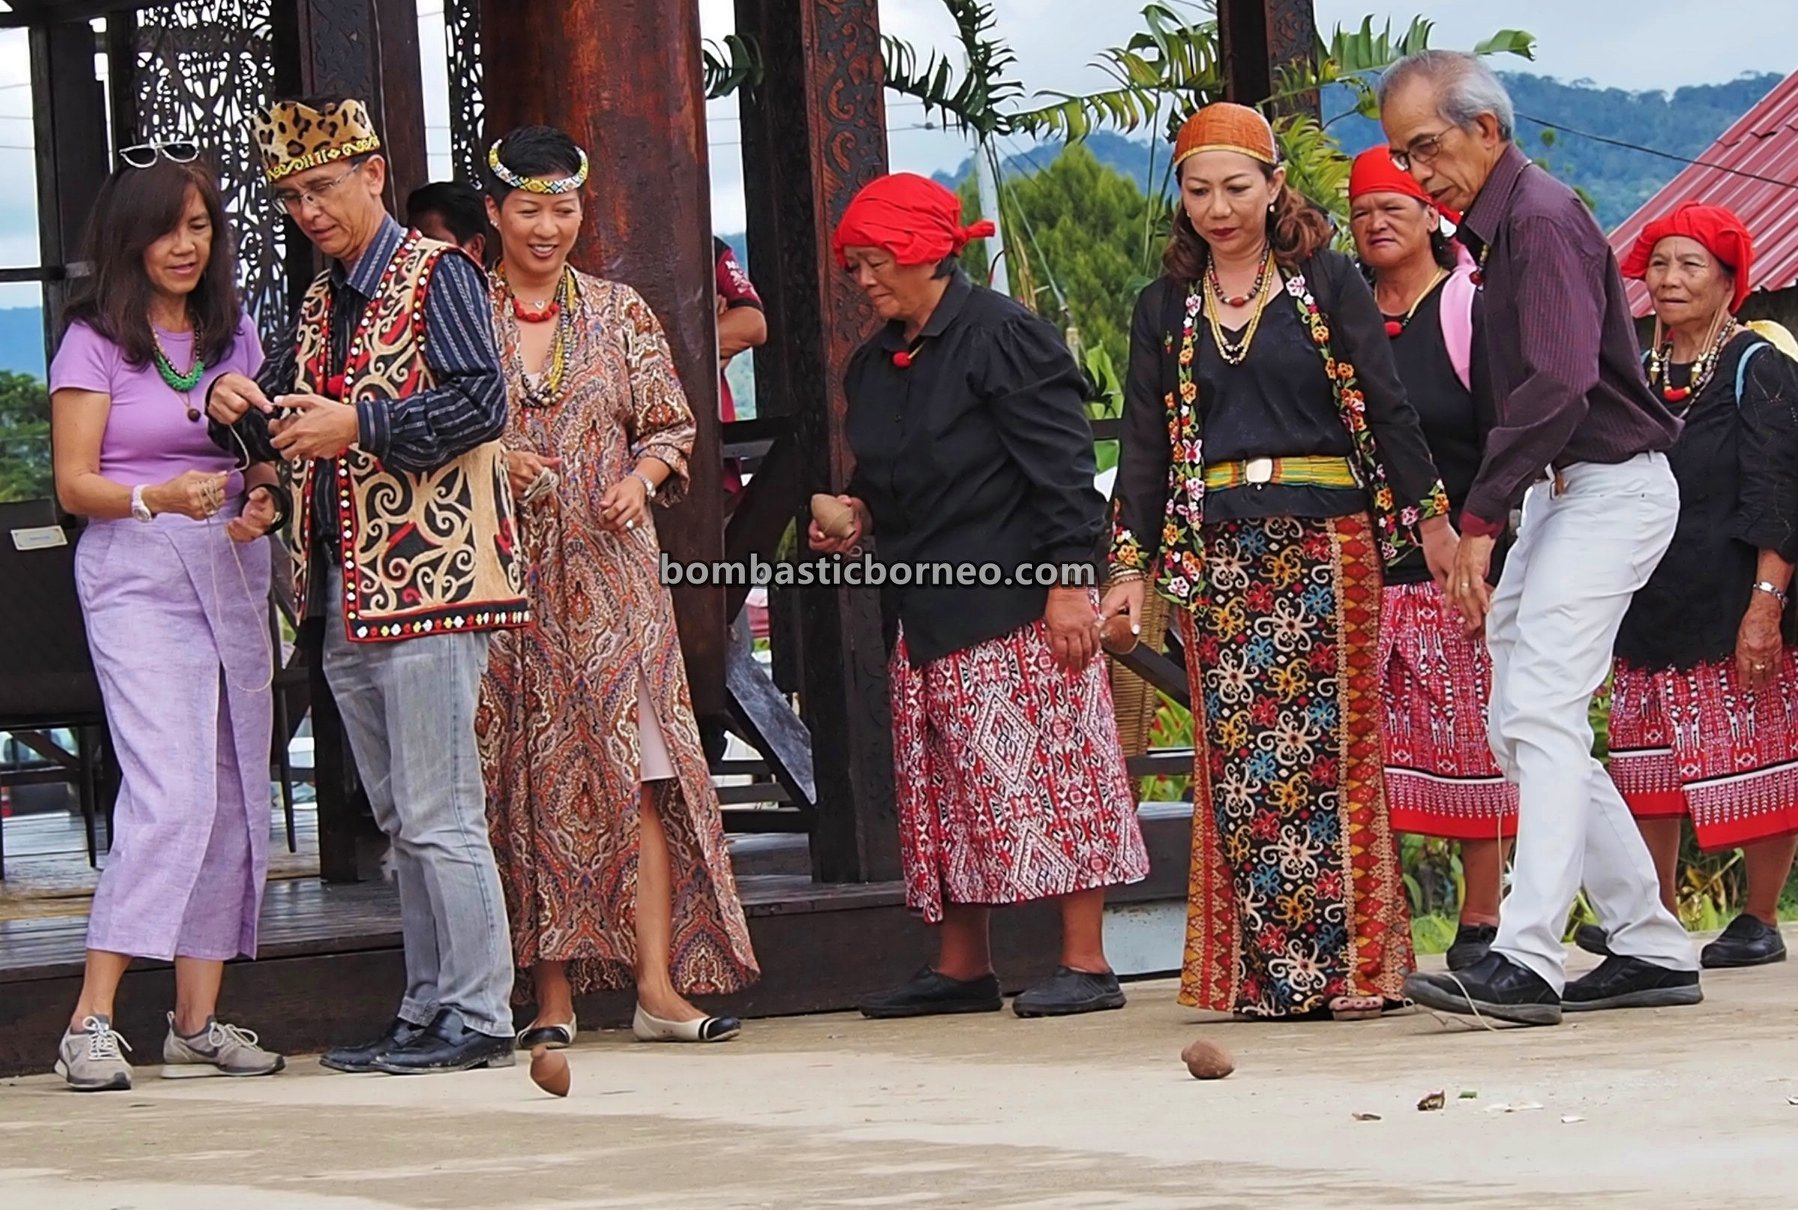 Bario Food Culture Festival, traditional games, authentic, backpackers, destination, exploration, native, tribe, Malaysia, Tourism, travel guide, Trans Borneo, 马来西亚砂拉越原住民, 巴里奥达雅加拉毕族, 乌鲁人土著部落,